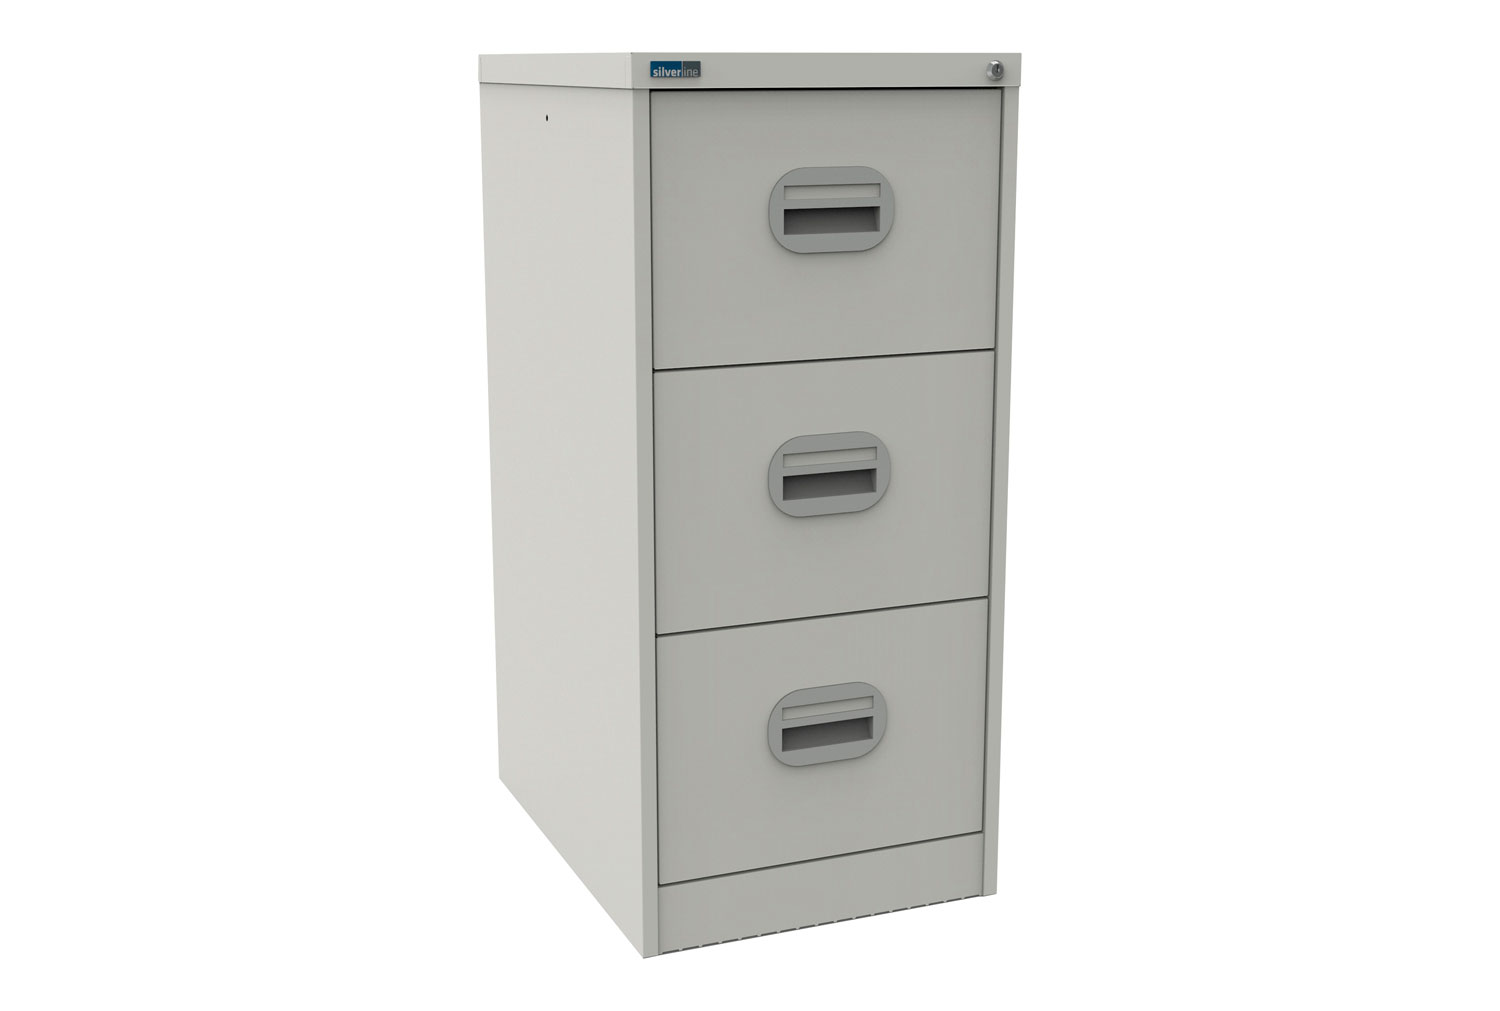 Silverline Kontrax 3 Drawer Filing Cabinet, 3 Drawer - 46wx62dx101h (cm), Traffic White, Express Delivery